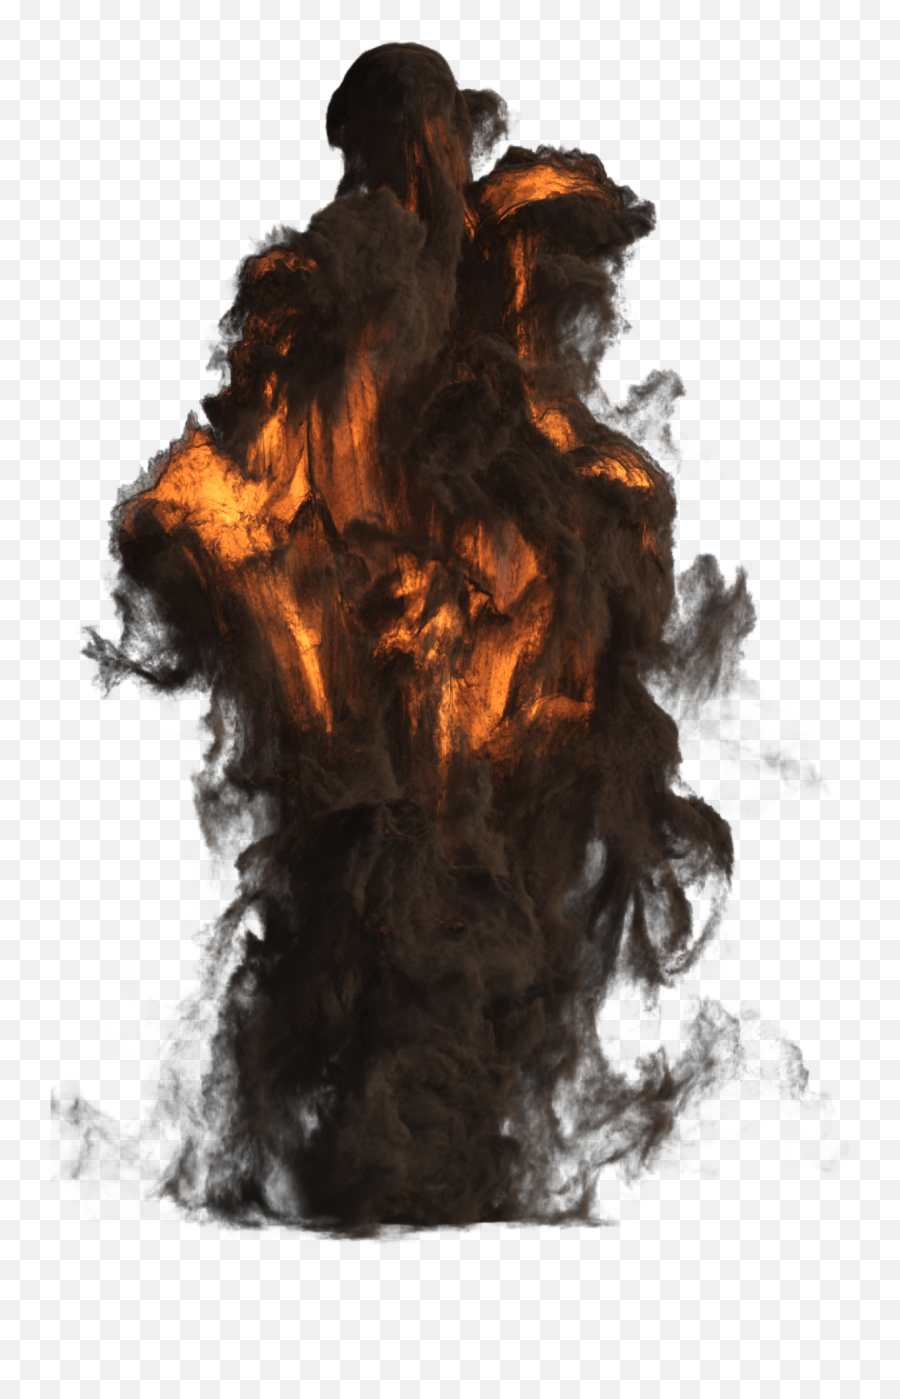 Smoking Explosion Png Images - Fire Smoke Explosion Png Emoji,Explosion Png